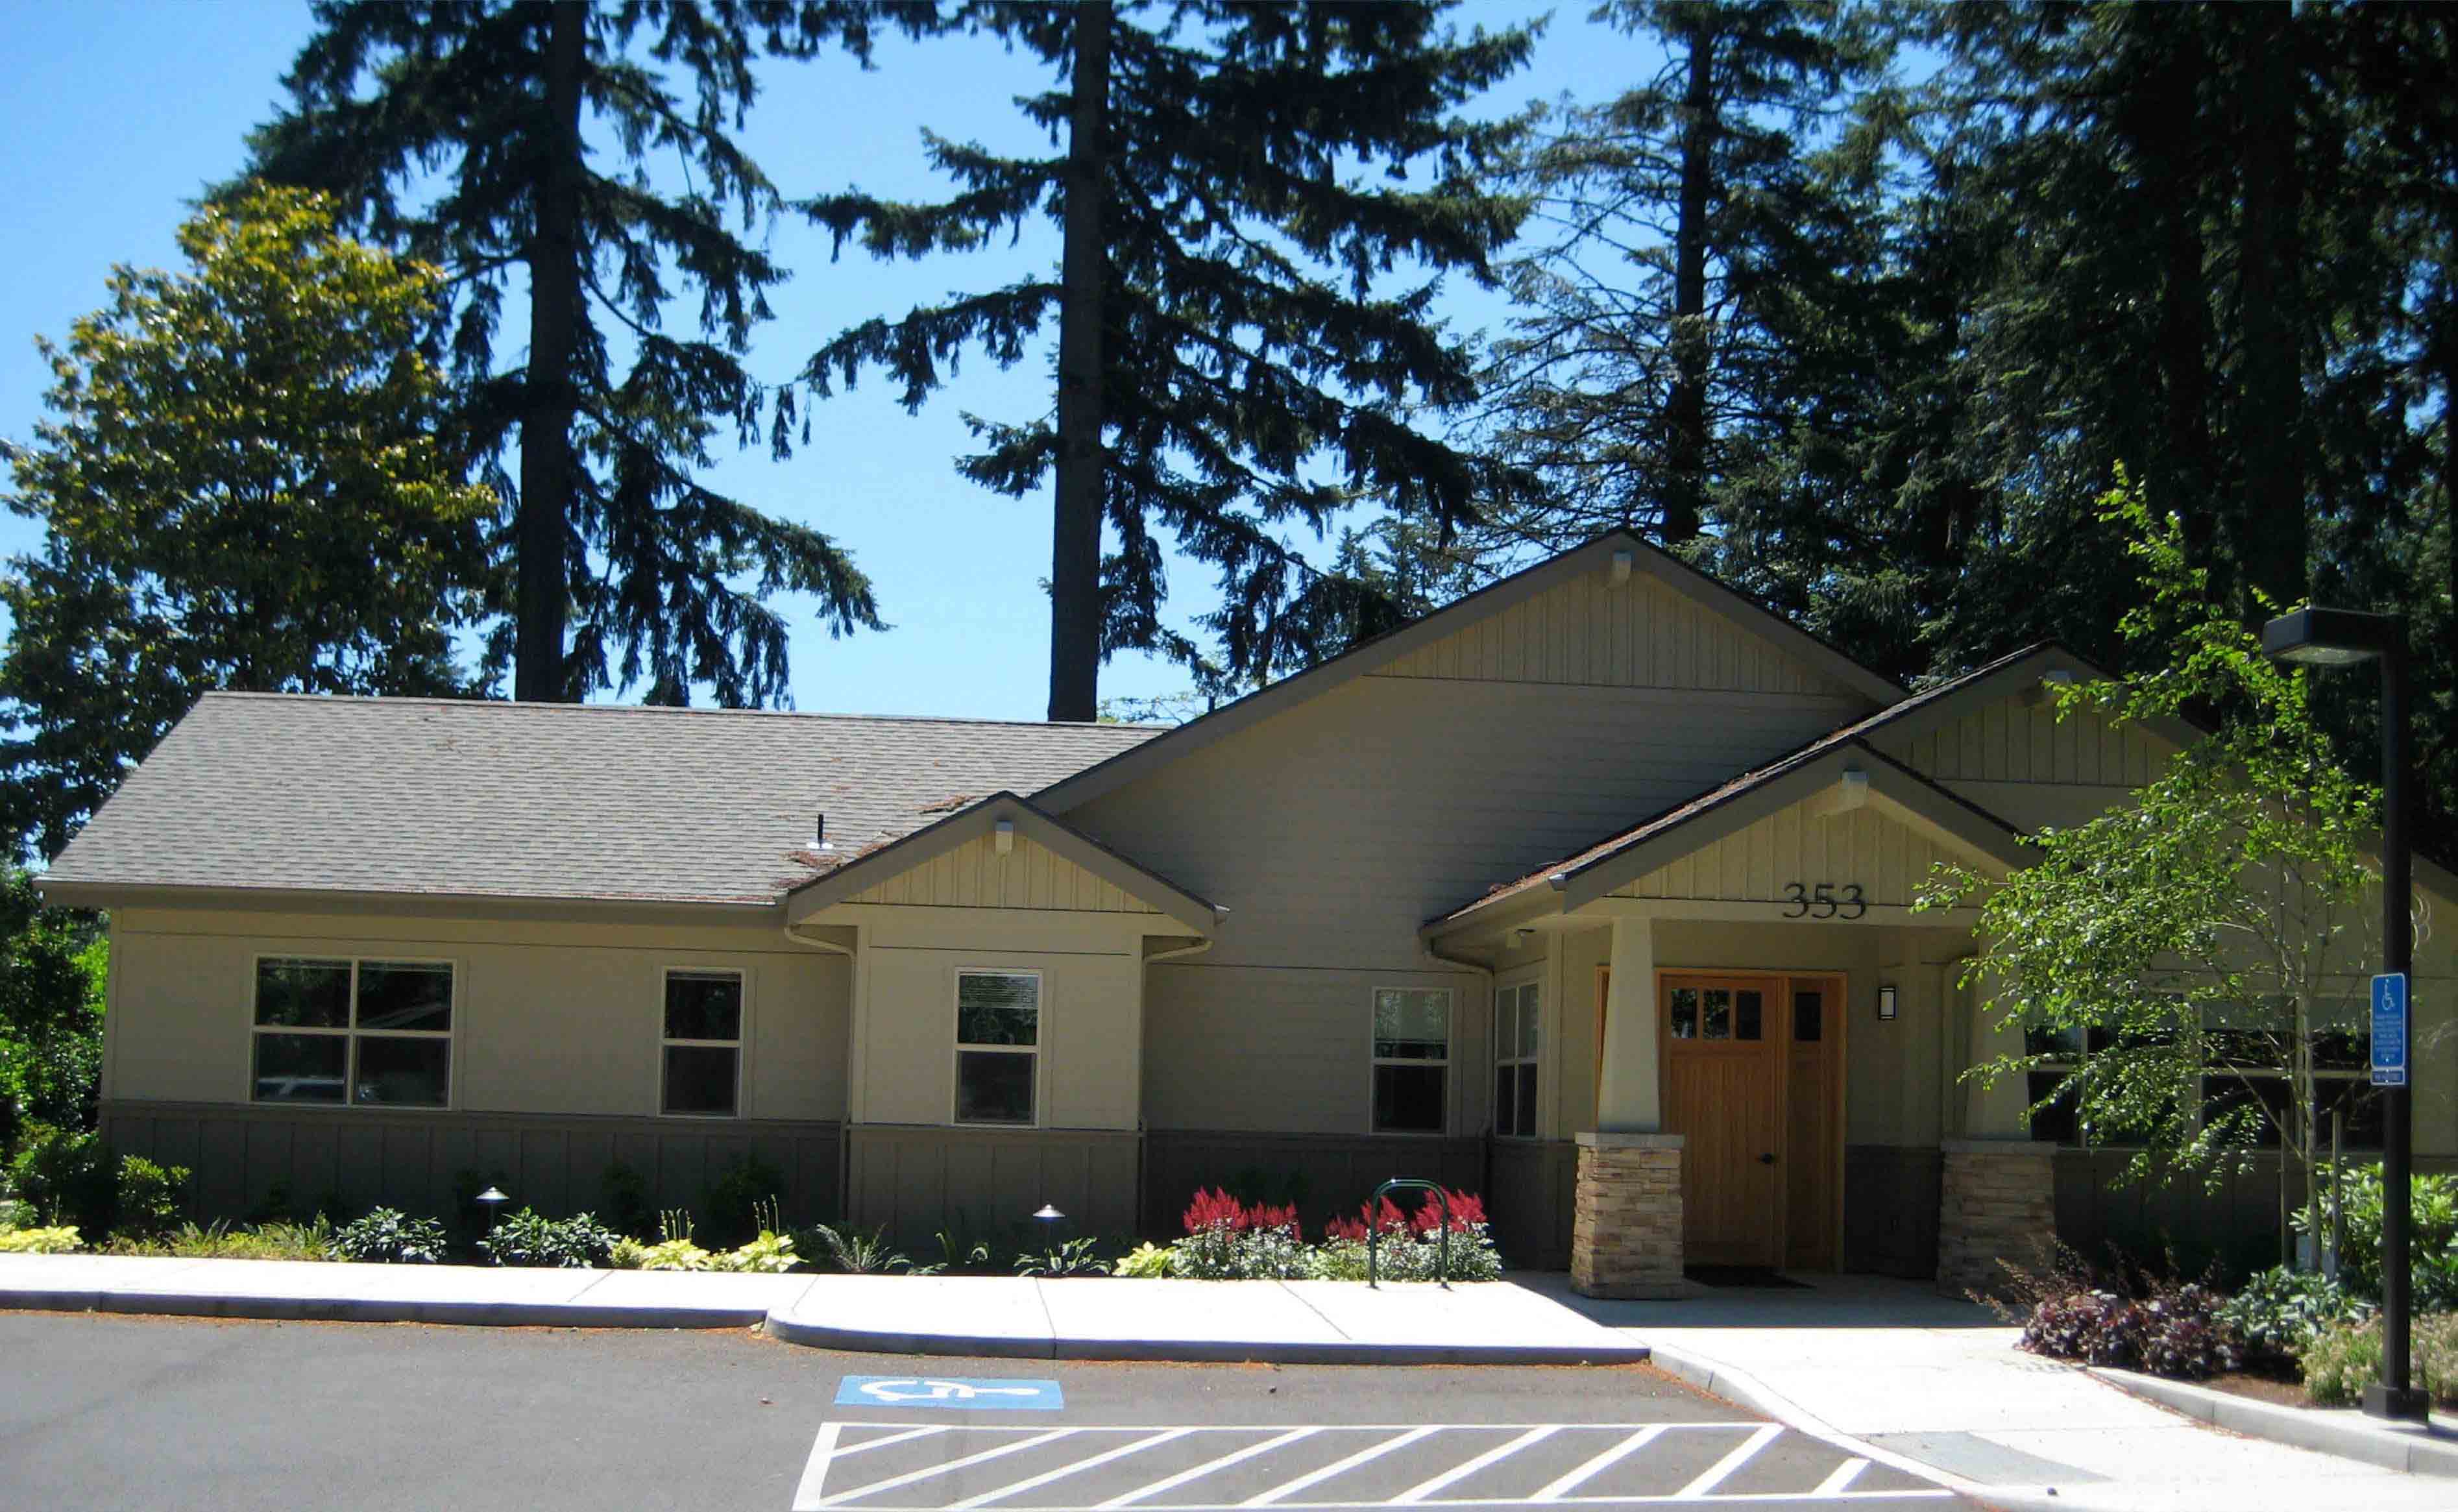 Site of the Nurse Midwifery Birth Center at Deadmond Ferry Rd, Springfield, OR (2009-2019)